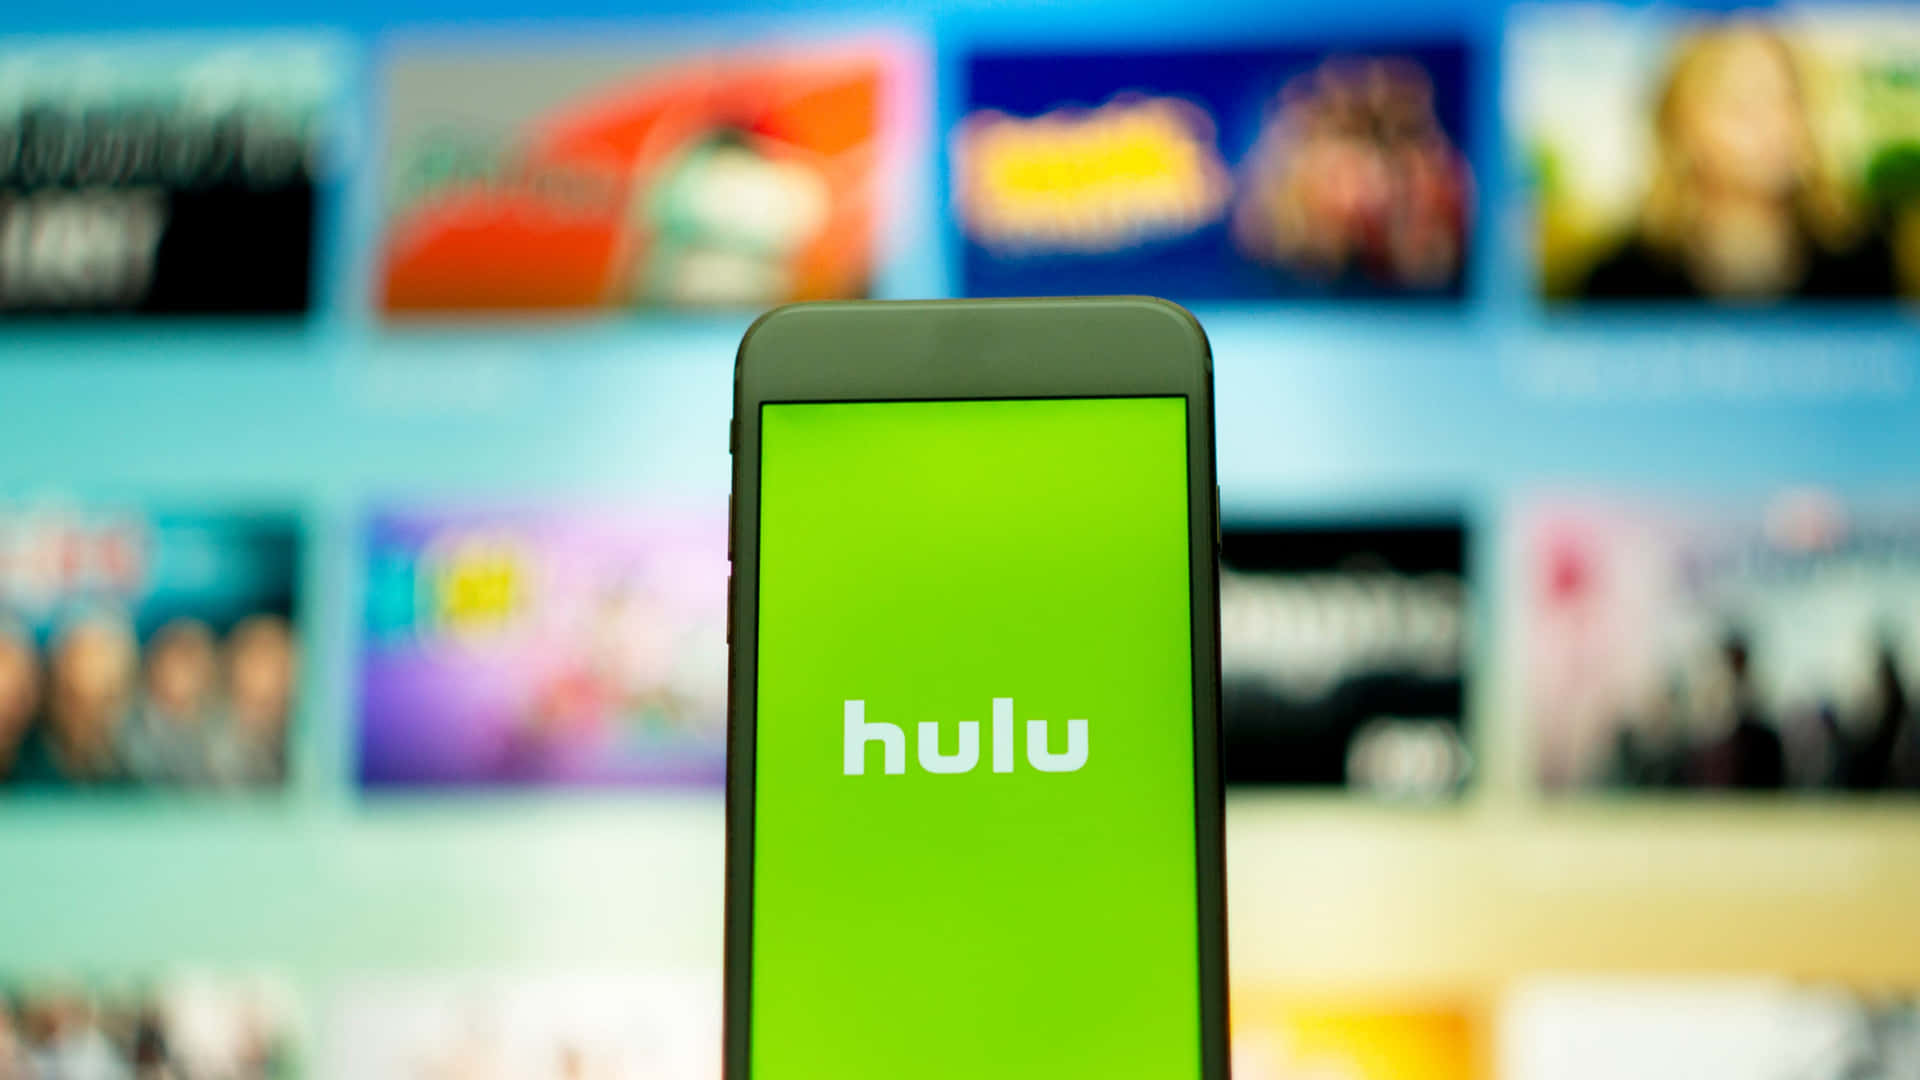 "Time To Binge and Relax - Stream Your Favorite Movies and Shows with Hulu"